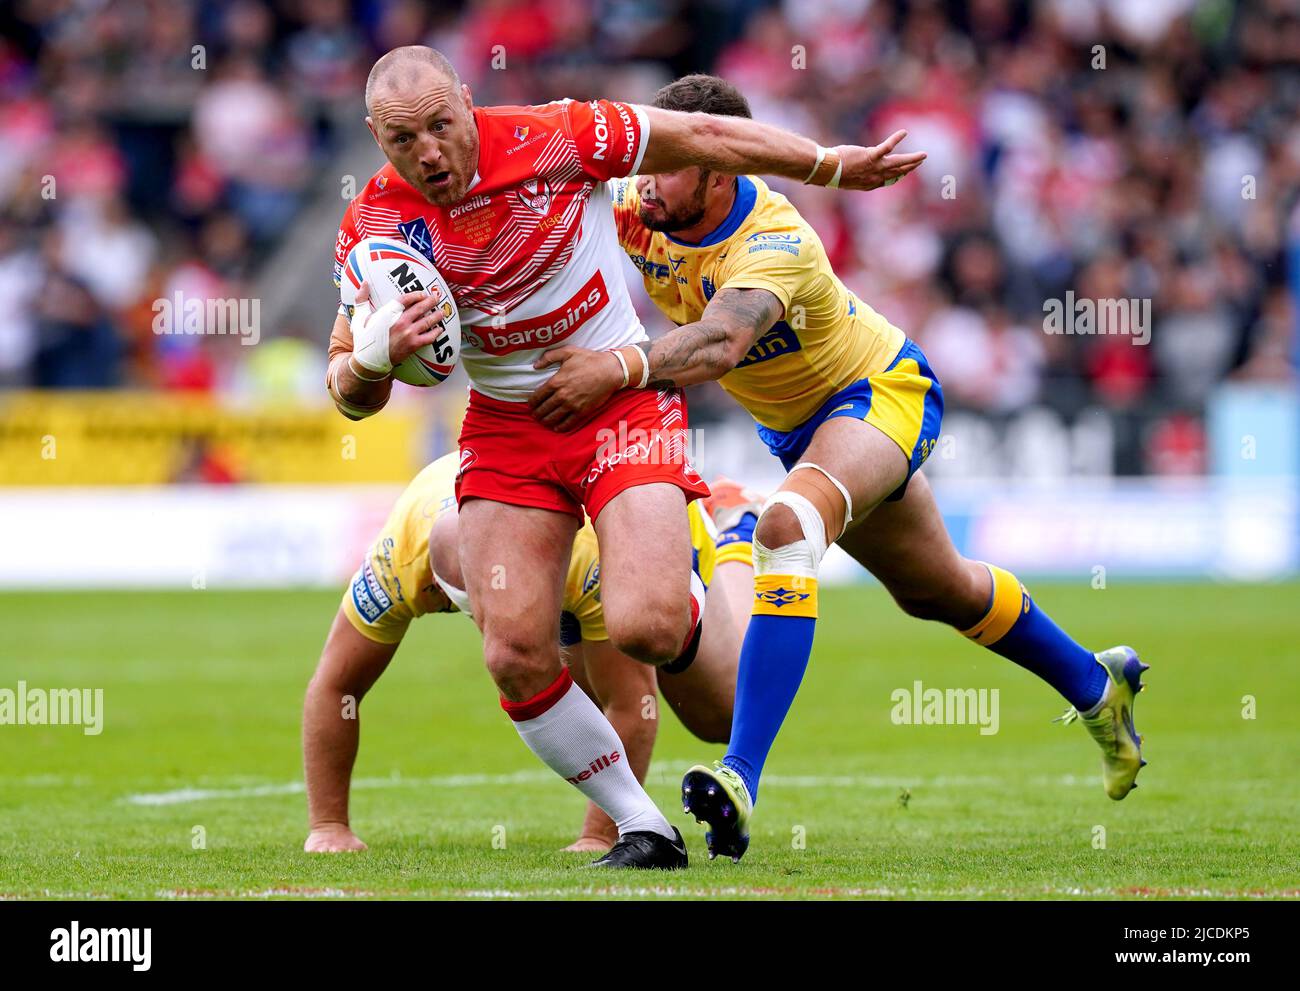 St Helens' James Roby is tackled by Hull Kingston Rovers' George King ...